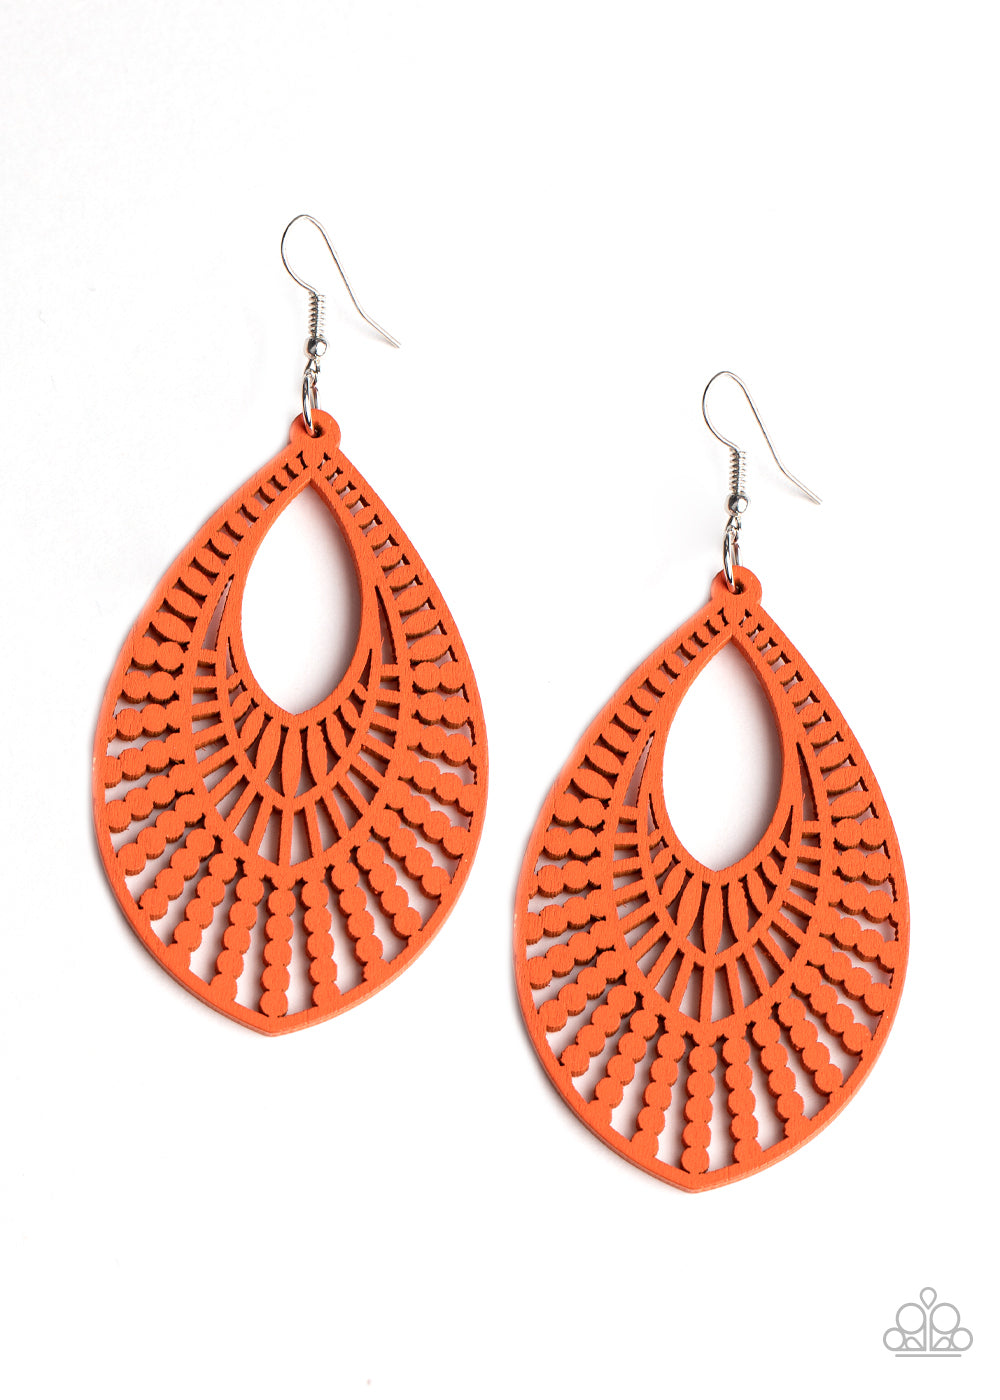 &lt;P&gt;Brushed in a refreshing orange finish, an airy wooden frame is cut into a stenciled teardrop lure for a summery flair. Earring attaches to a standard fishhook fitting.&lt;/P&gt;  

&lt;P&gt; &lt;I&gt;  Sold as one pair of earrings. &lt;/I&gt;  &lt;/P&gt;


&lt;img src=\&quot;https://d9b54x484lq62.cloudfront.net/paparazzi/shopping/images/517_tag150x115_1.png\&quot; alt=\&quot;New Kit\&quot; align=\&quot;middle\&quot; height=\&quot;50\&quot; width=\&quot;50\&quot;/&gt;